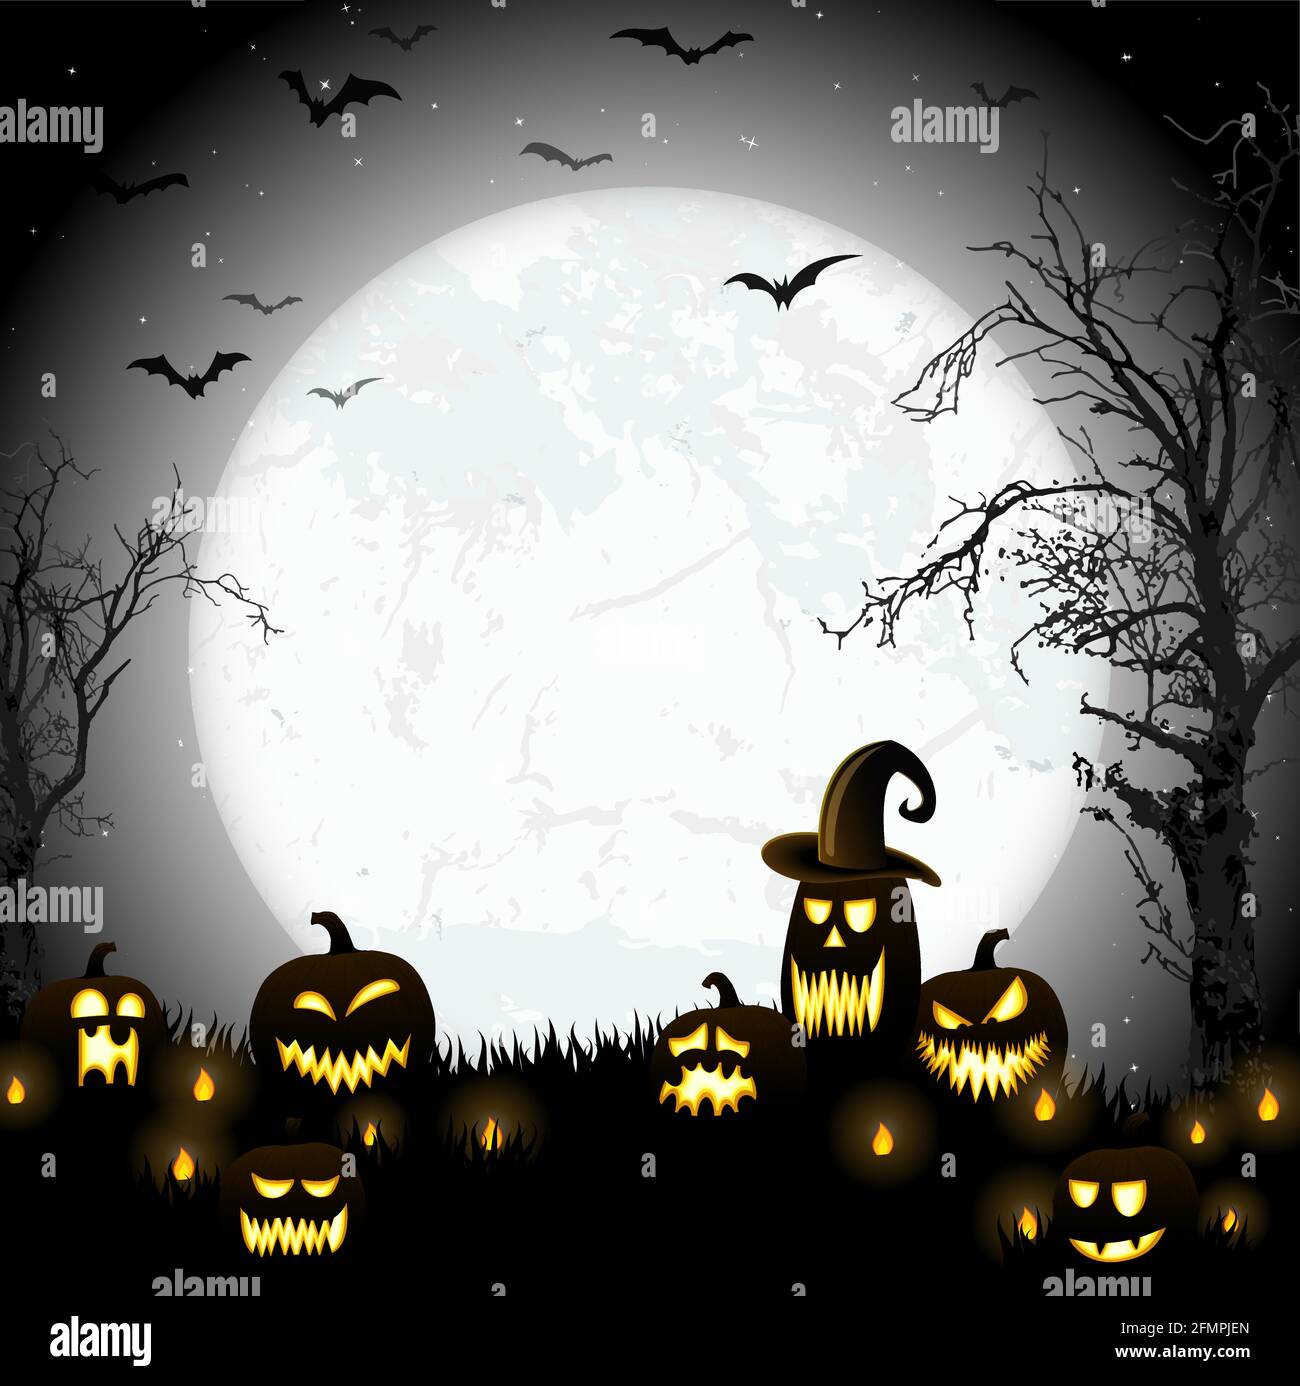 spooky halloween dead tree with some scary pumpkins in front of an full moon with bats Stock Vector